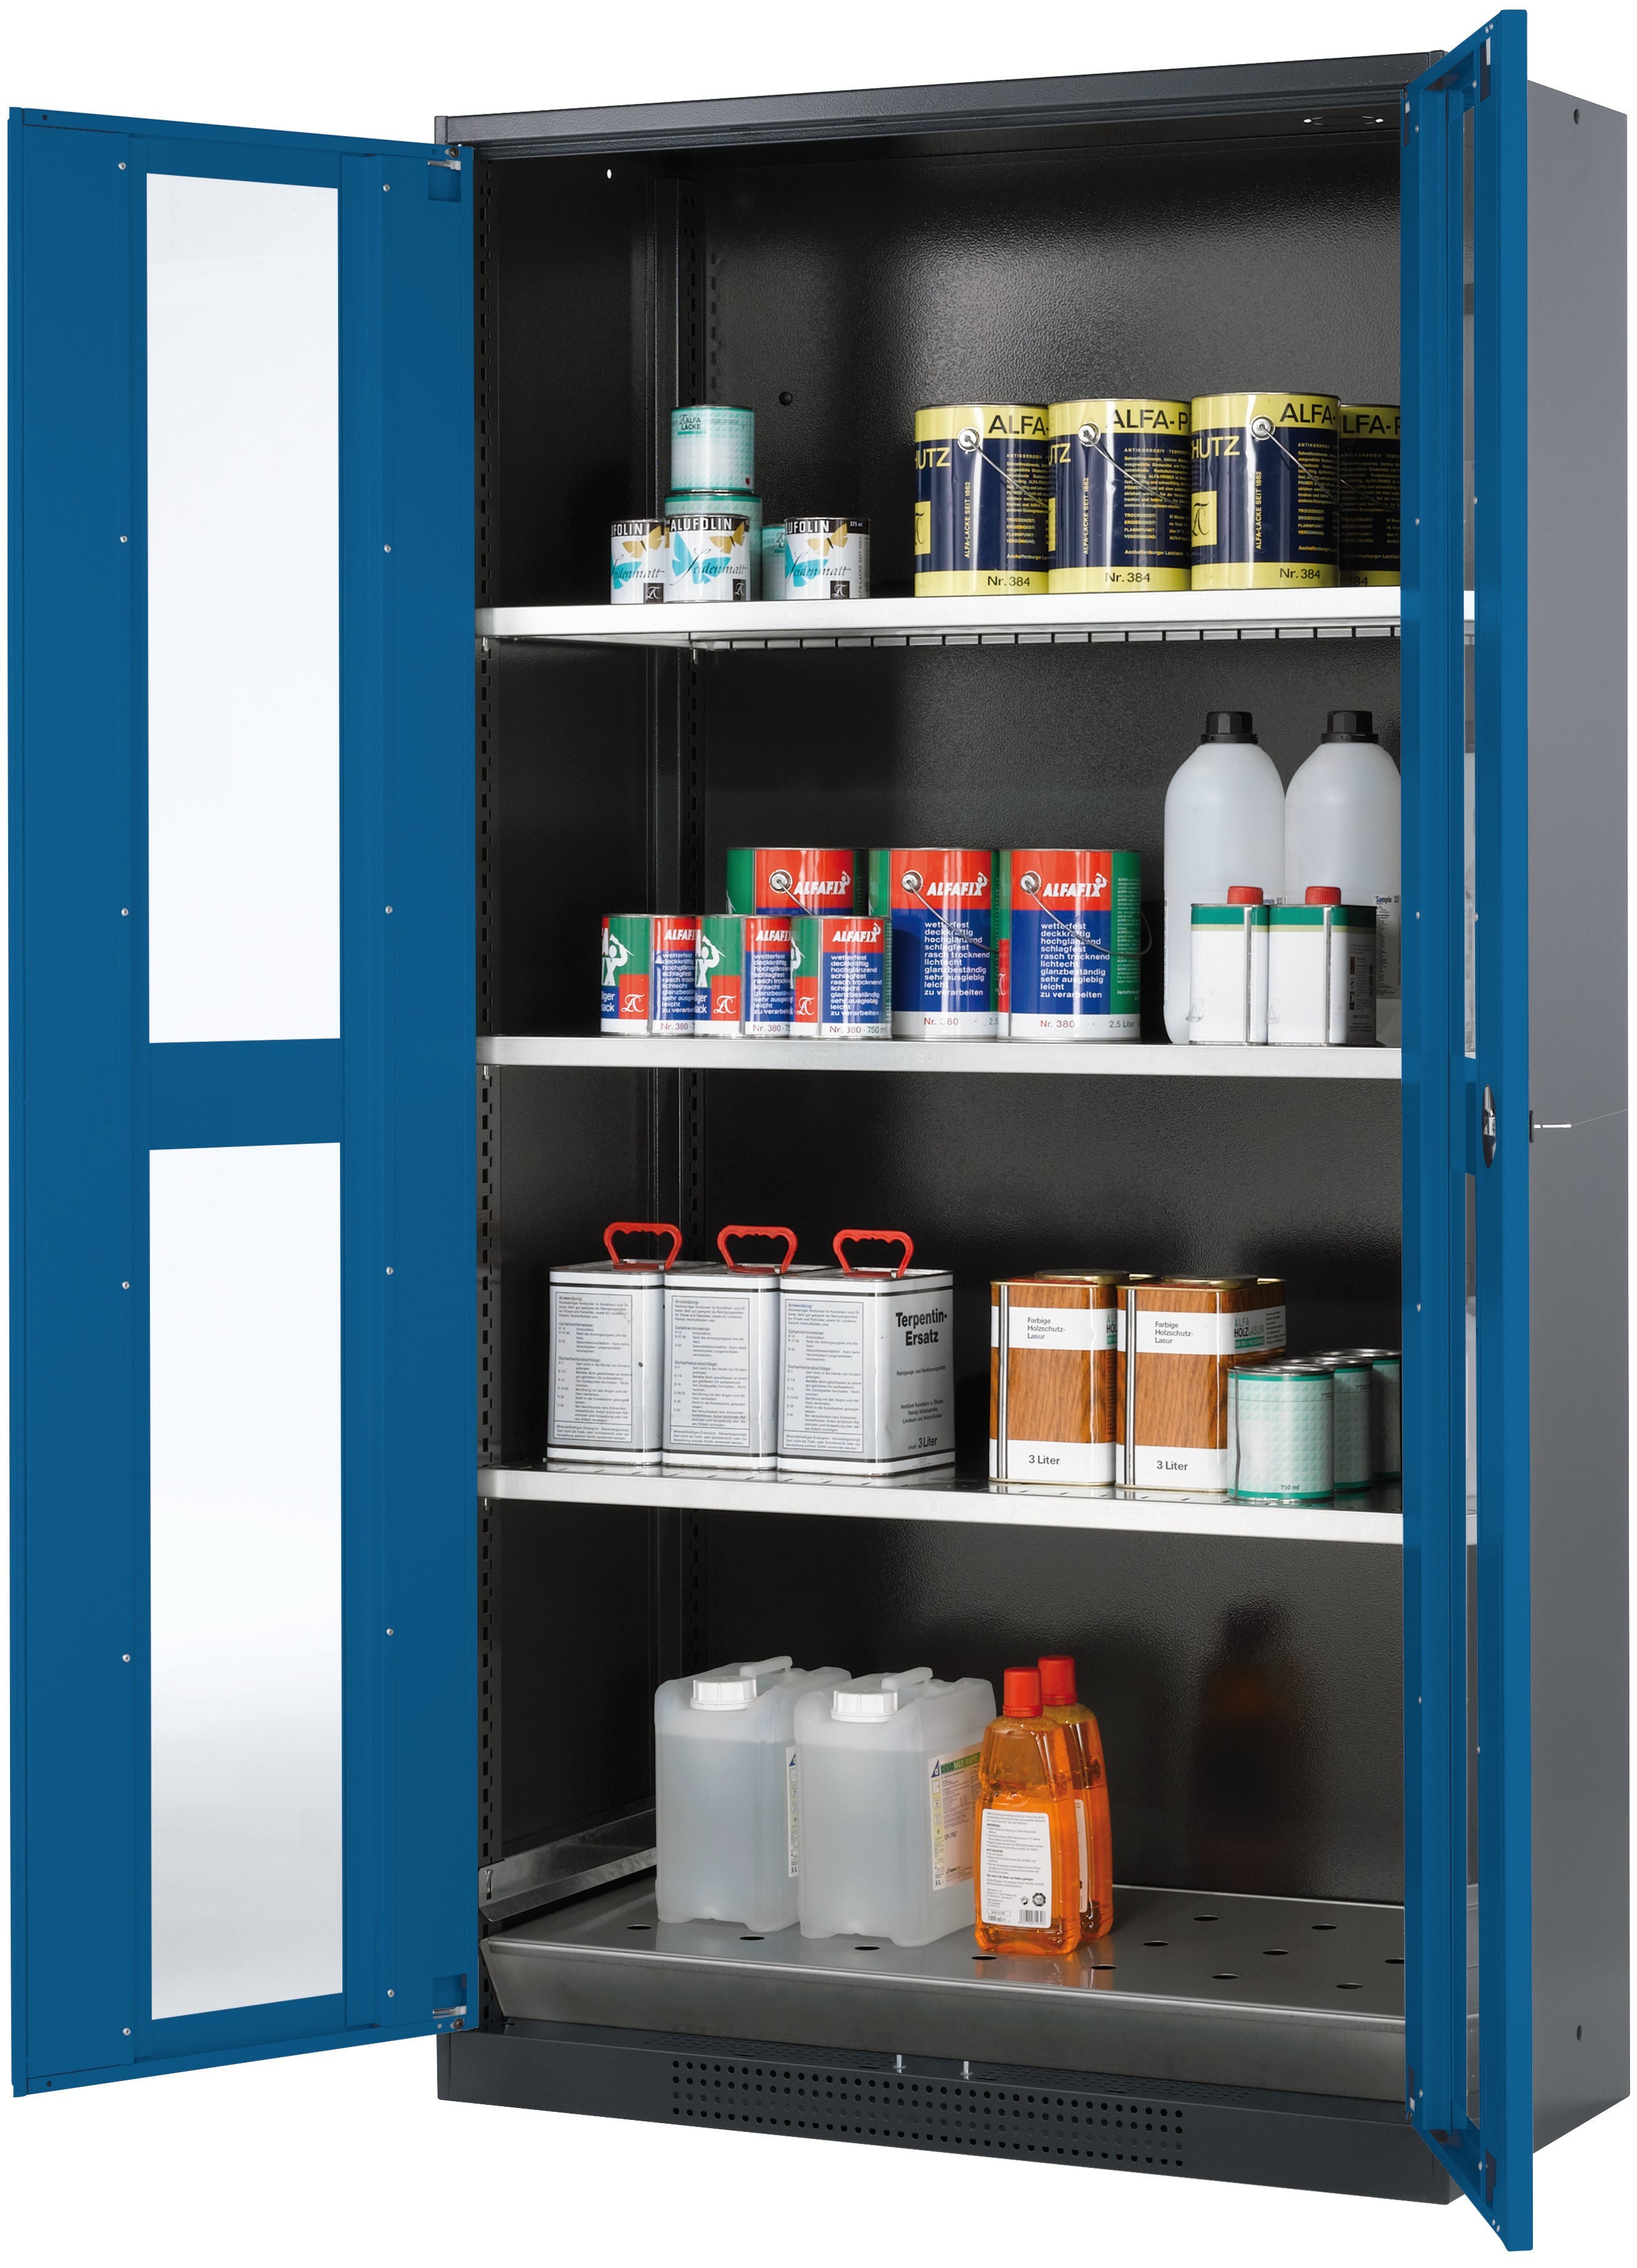 Chemical cabinet CS-CLASSIC-G model CS.195.105.WDFW in gentian blue RAL 5010 with 3x standard shelves (sheet steel)